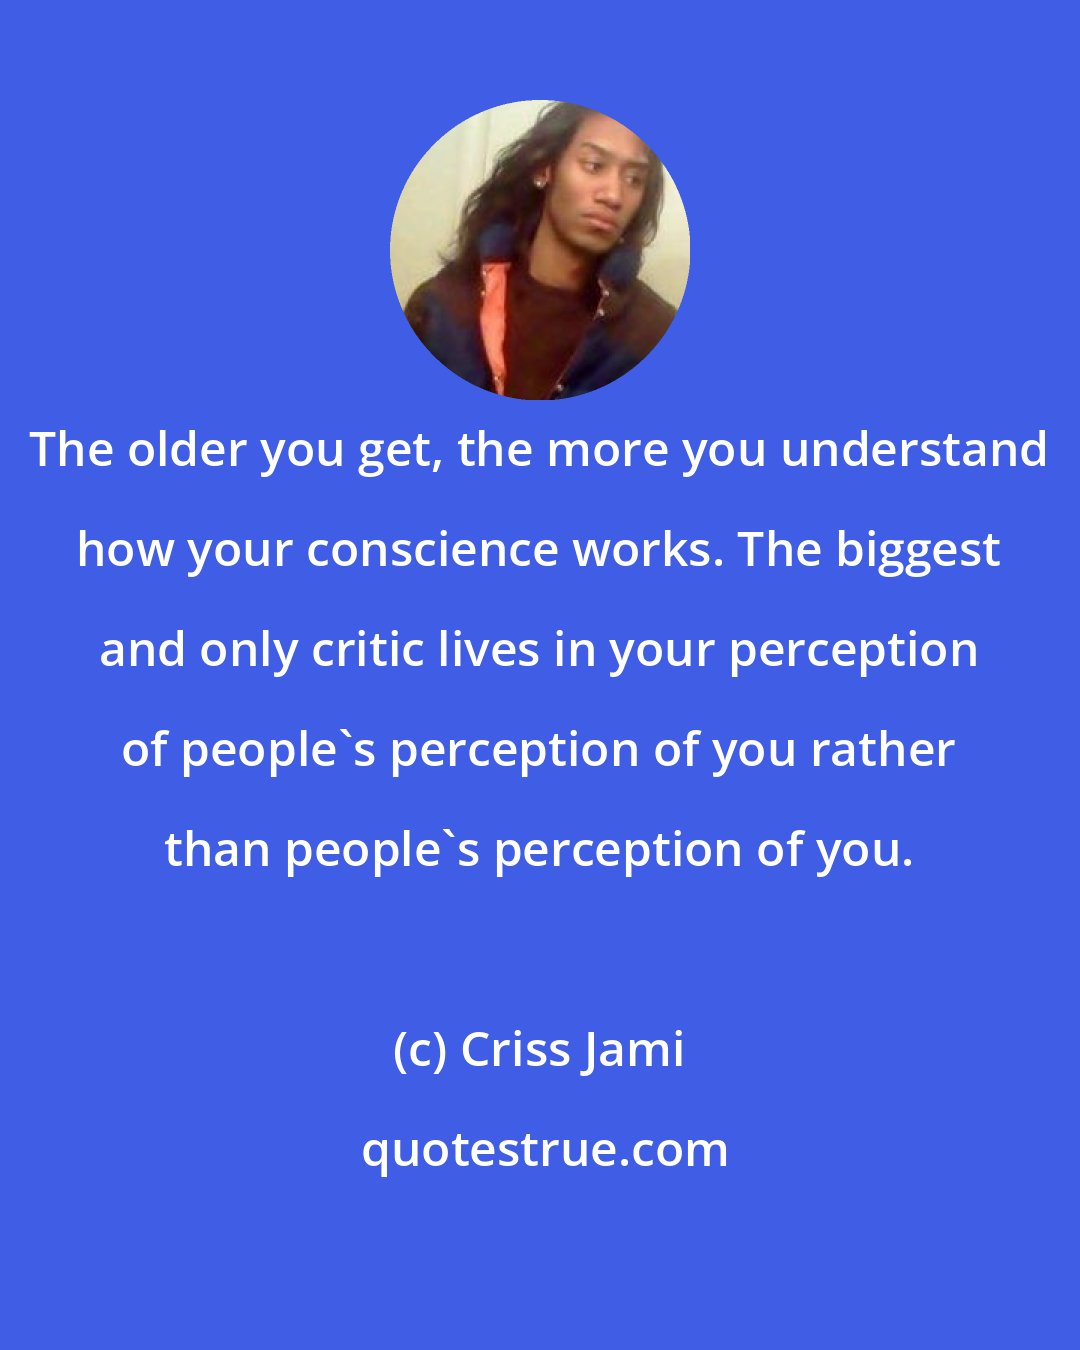 Criss Jami: The older you get, the more you understand how your conscience works. The biggest and only critic lives in your perception of people's perception of you rather than people's perception of you.